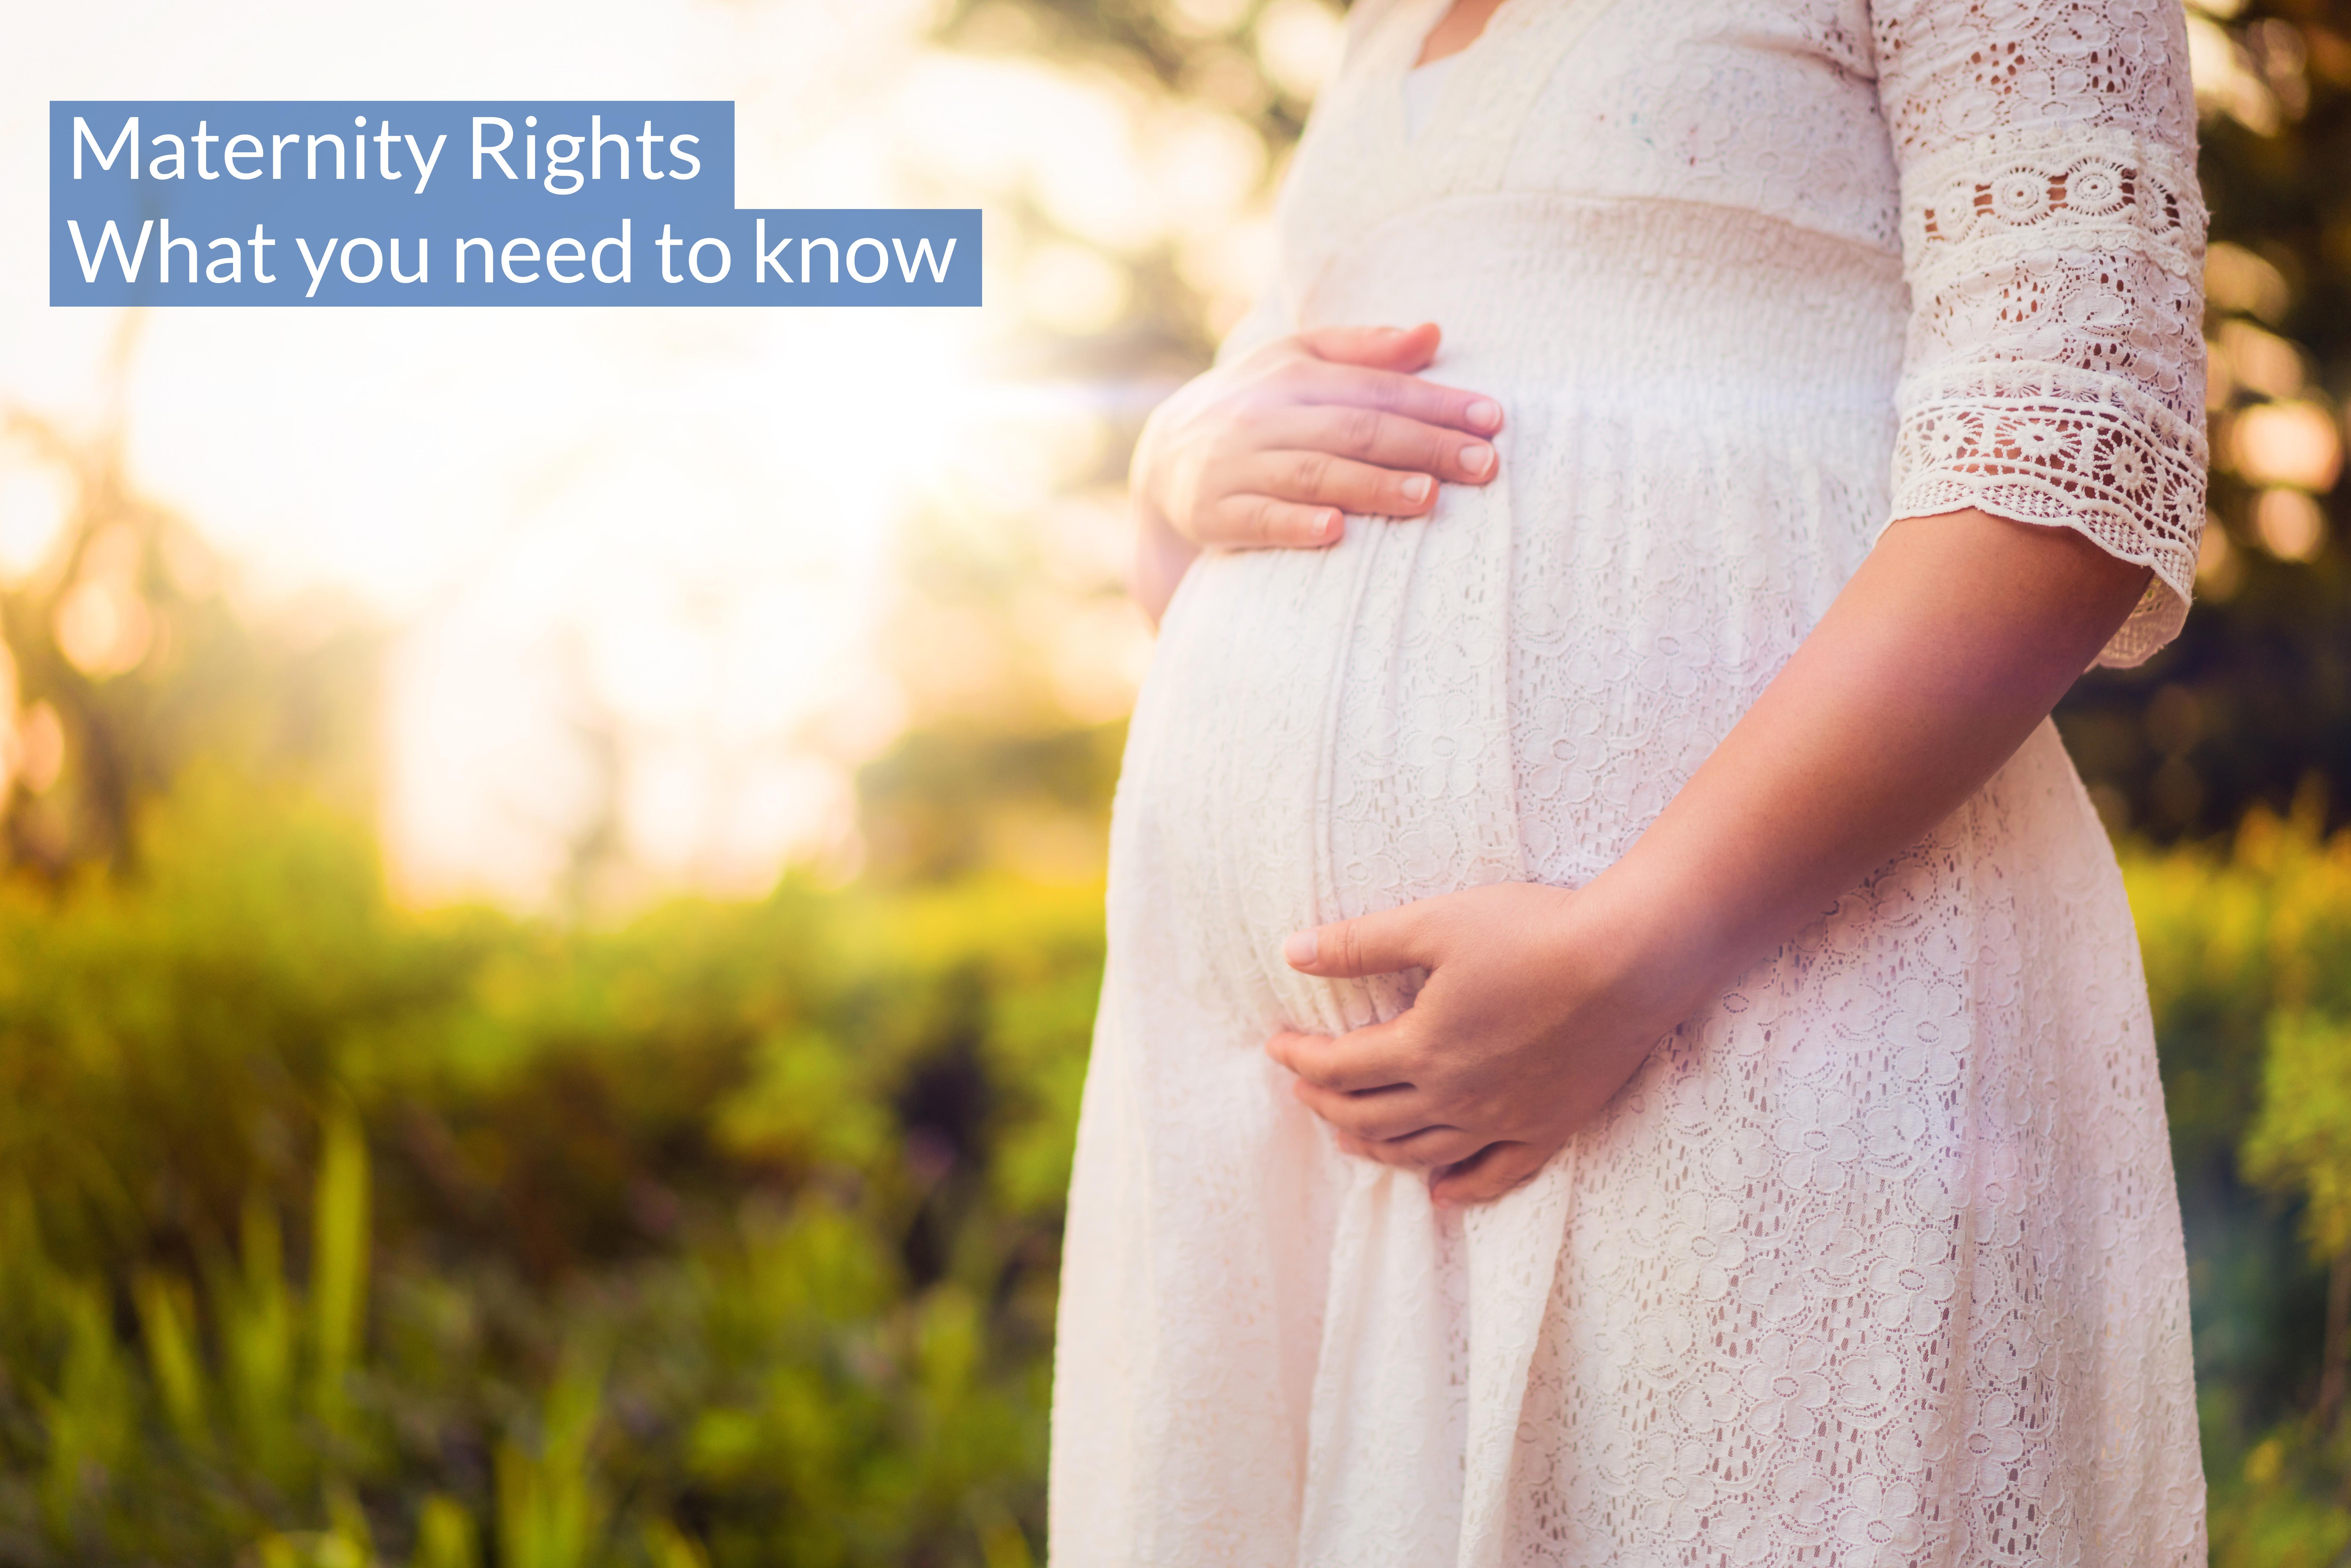 Your Maternity Rights